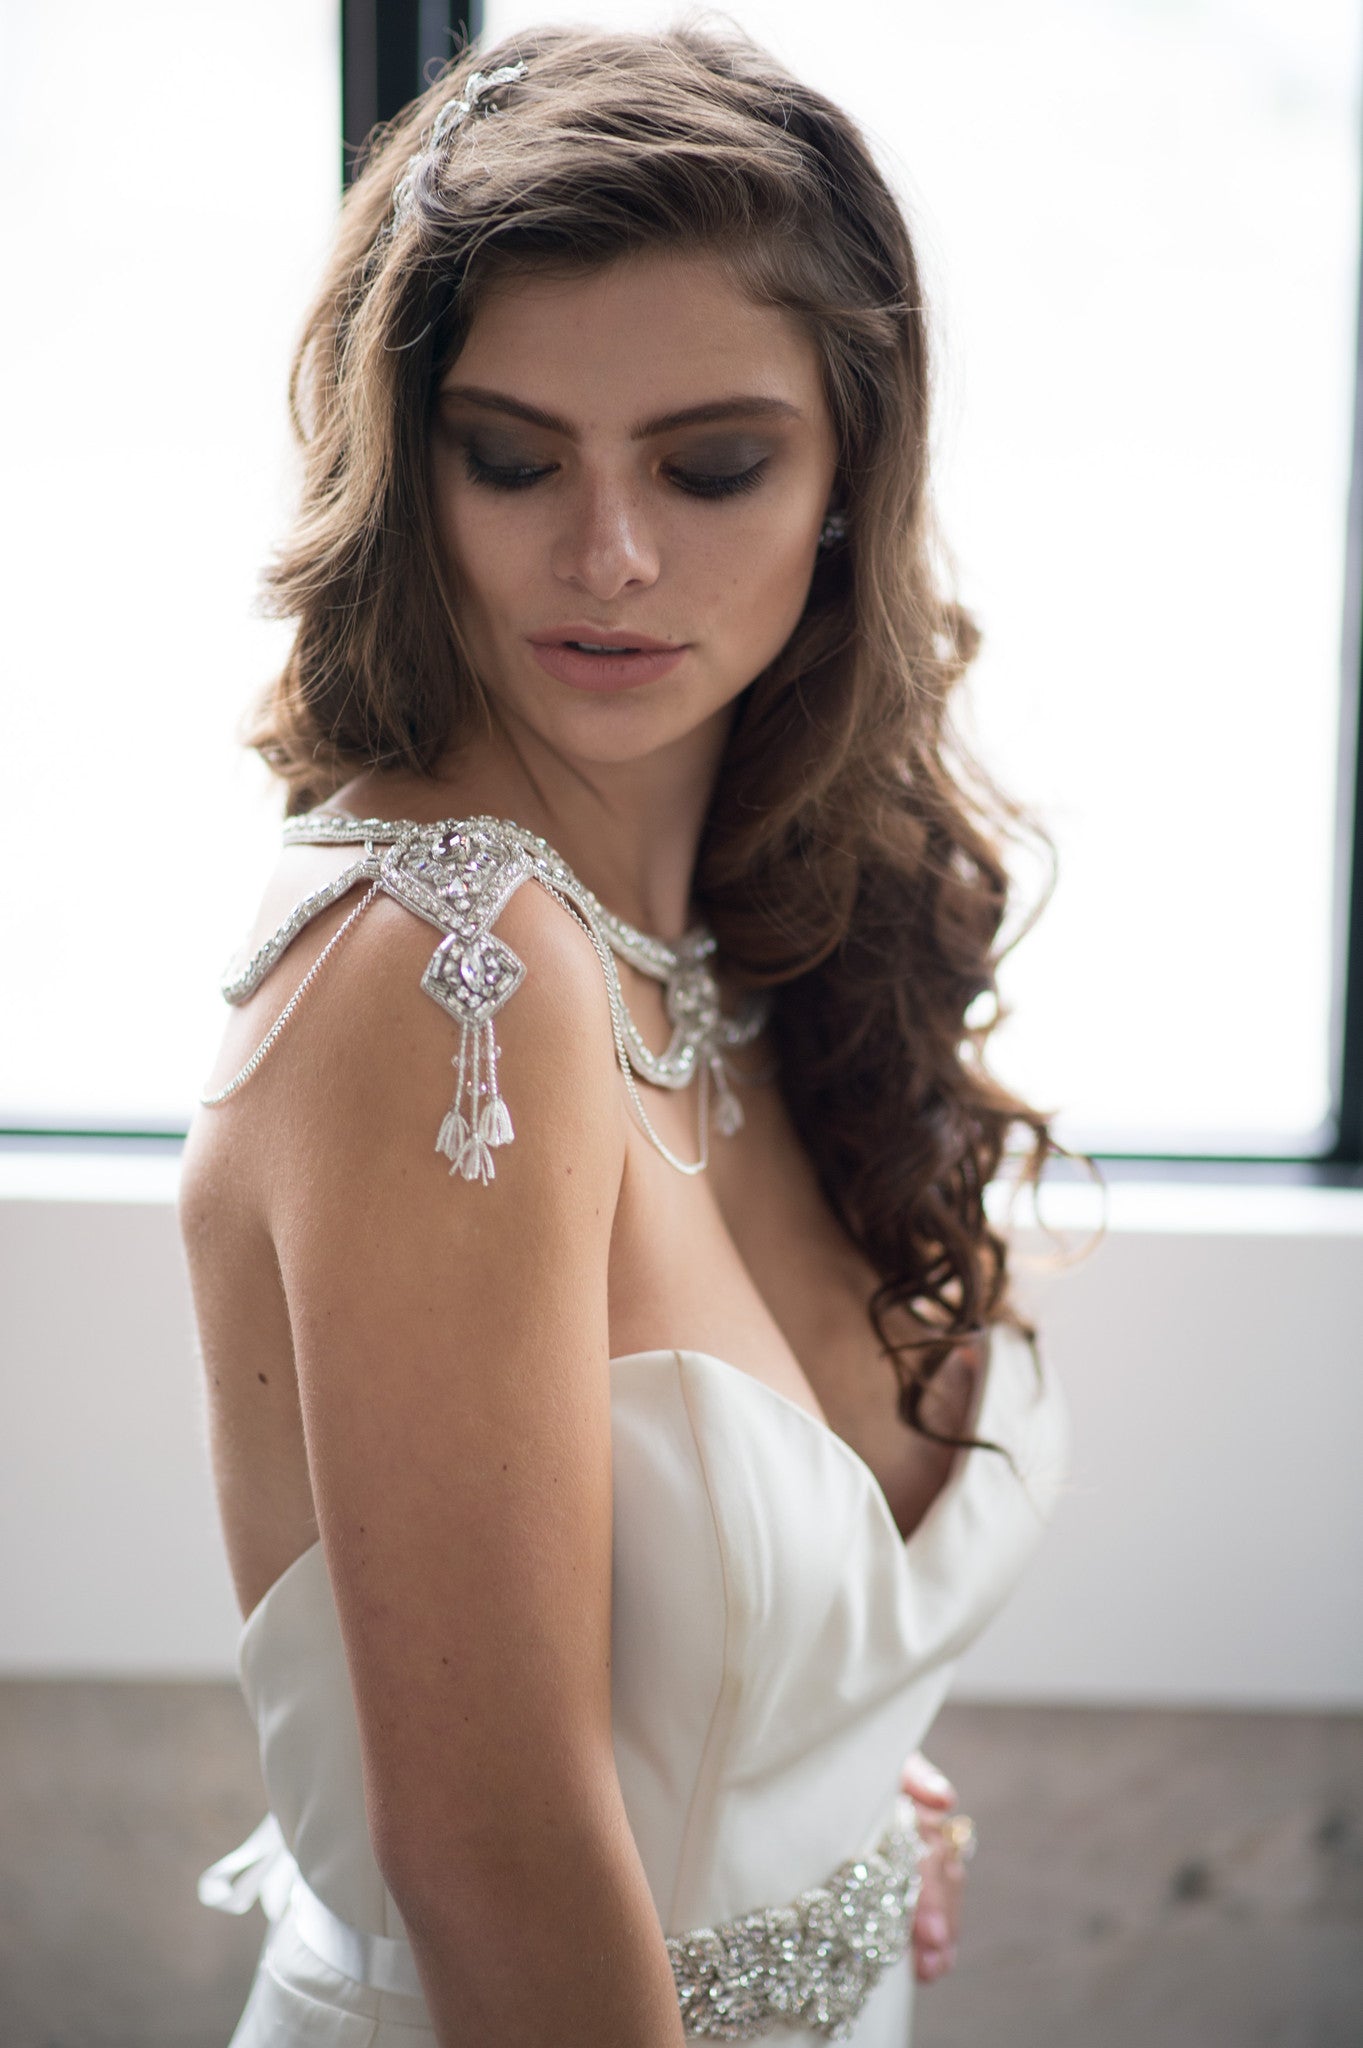 Bridal Accessories and Wedding Jewelry, Camilla Christine, Necklace, Shoulder Necklace, Mitsy, Silver, Glamorous  Crystal & Chain Swag  Statement Bridal Shoulder Necklace with Cutout Detail